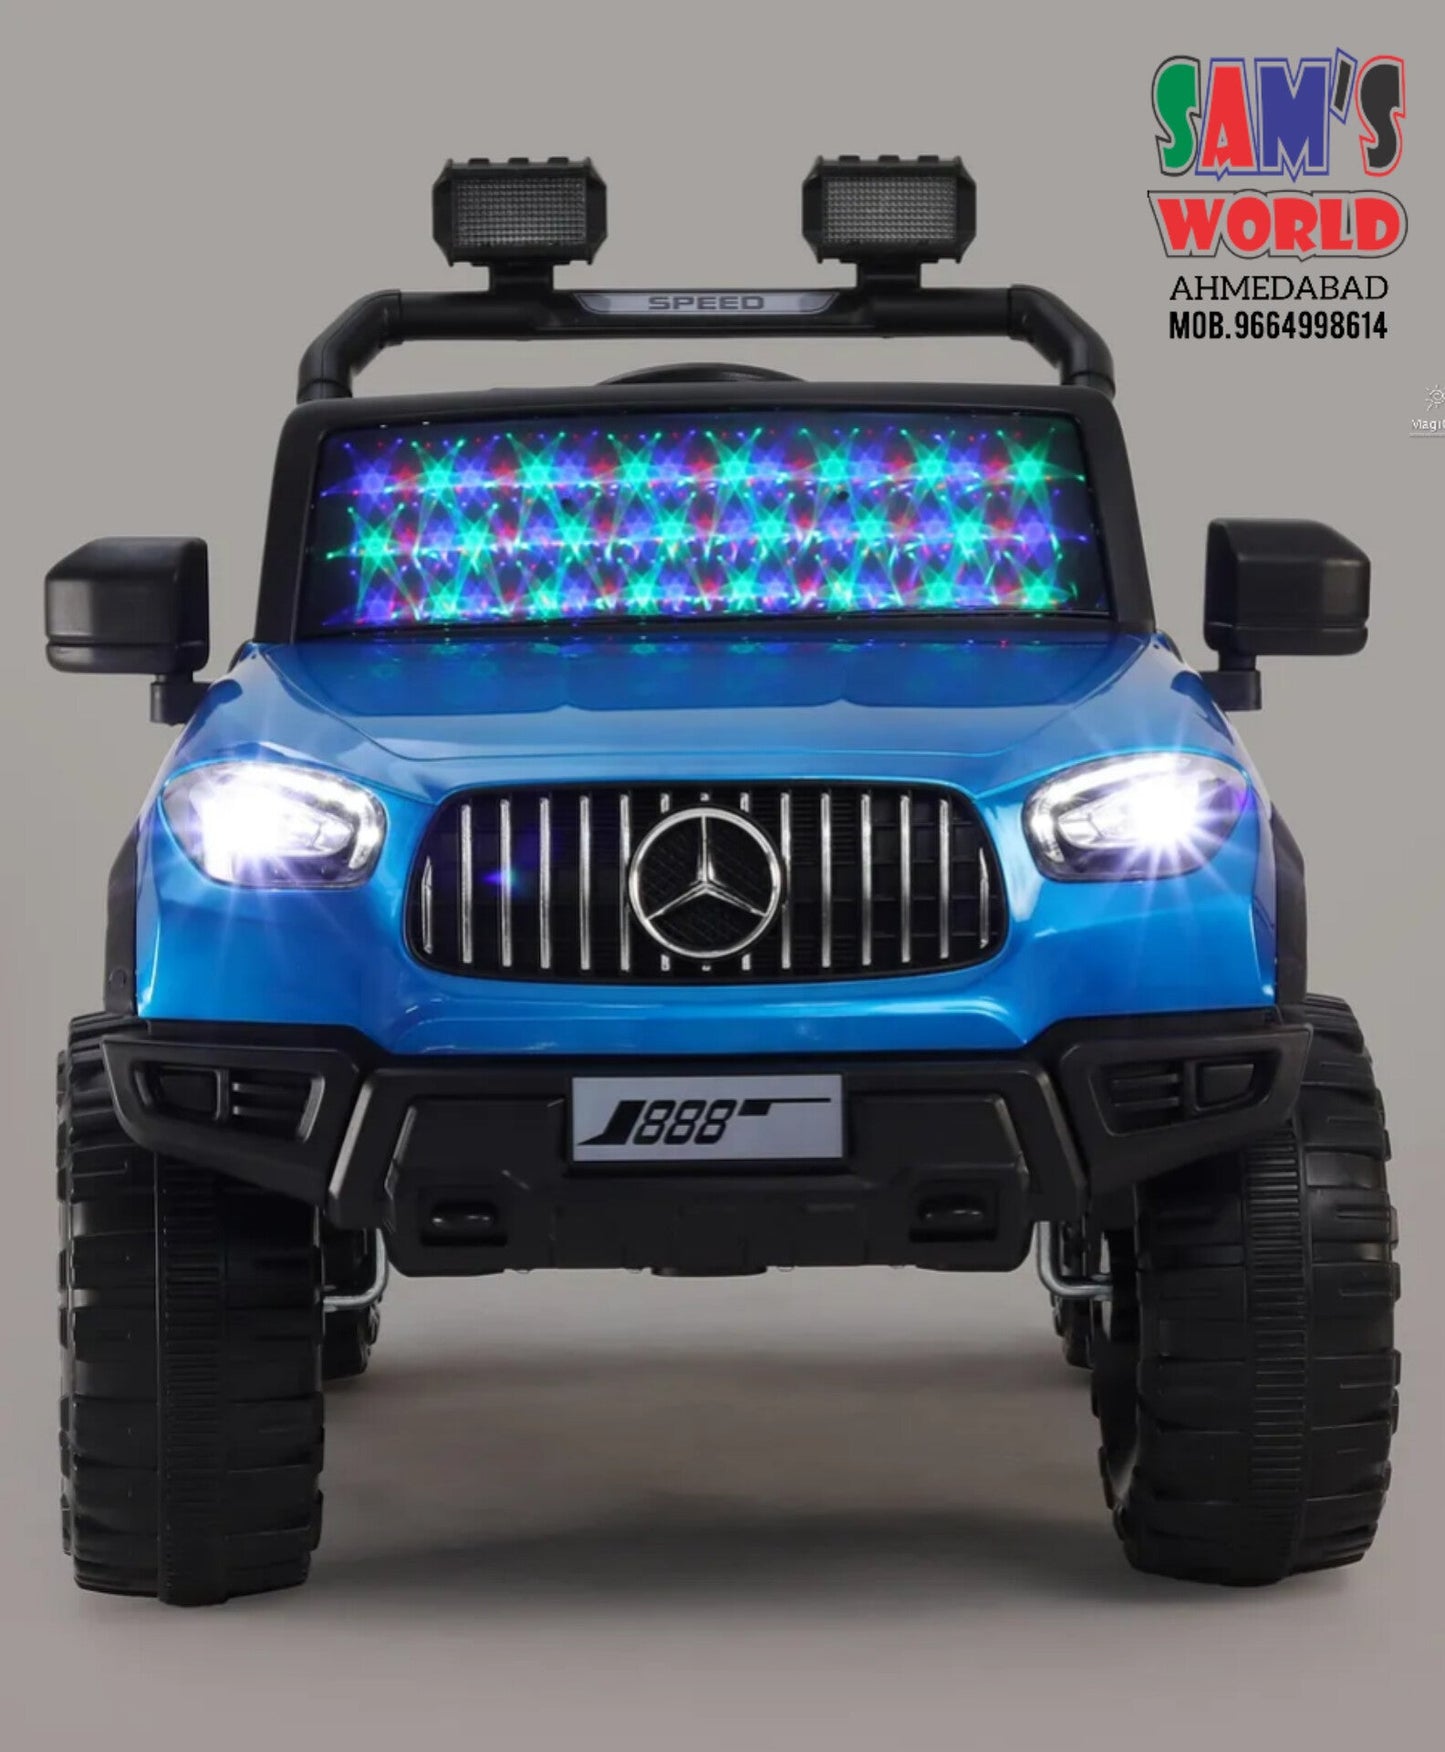 2024 Mercedes Kids ride on Jeep With Windshield 3D Light Battery Operated SUV 888 | Sams Toy samstoy.in Sams toy world Ahmedabad 